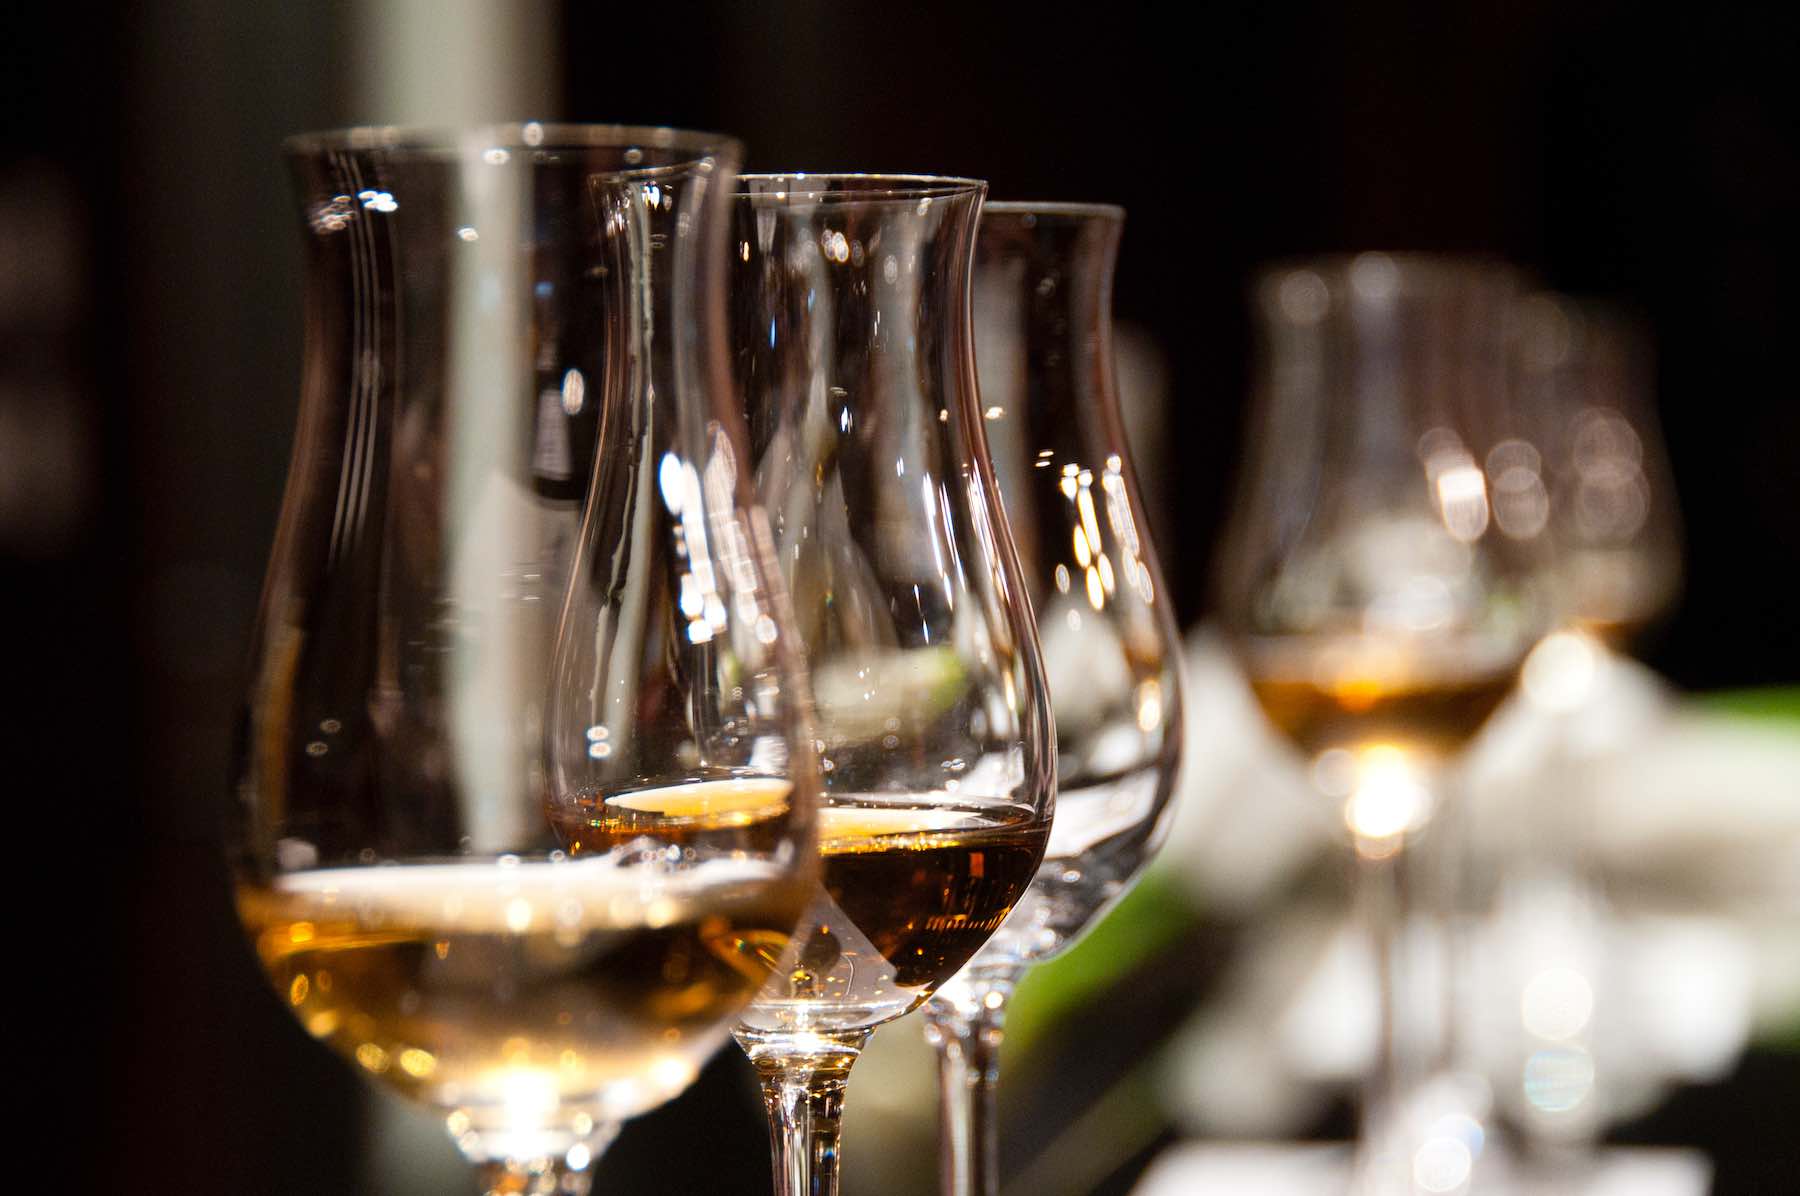 Why is single cask whisky so expensive?